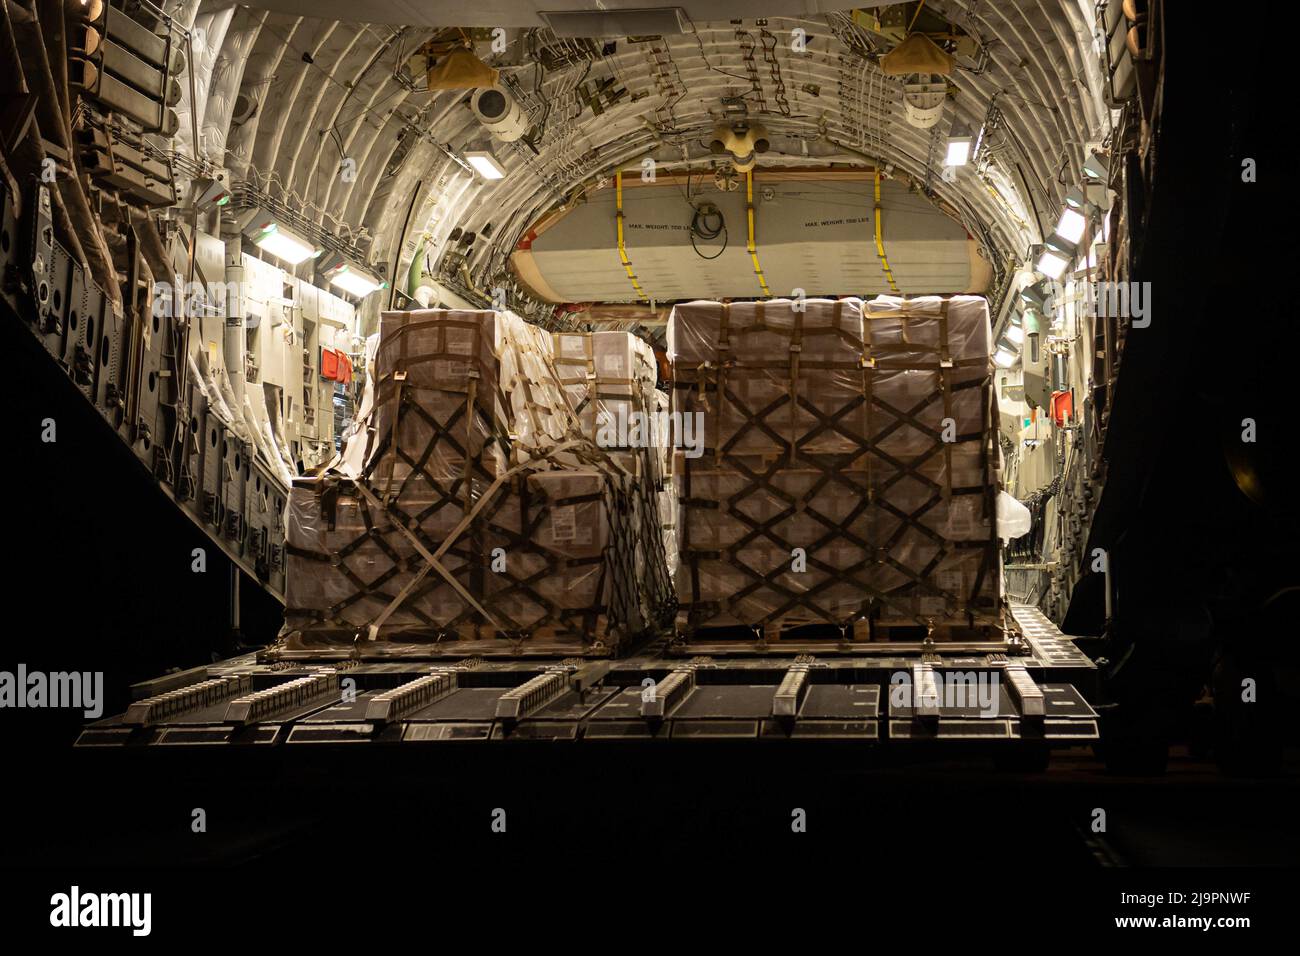 A C-17 Globemaster lll aircraft assigned to Joint Base Pearl Harbor-Hickam, Hawaii, prepares to depart from Ramstein Air Base, Germany, with 132 pallets of Nestle’s Alfamino®️ Infant and Alfamino®️ Junior formula, May 22, 2022. The infant formula arrived from Switzerland as part of the U.S. Government’s Operation Fly Formula to rapidly transport infant formula to the United States due to critical shortages there. These formulas have been prioritized because they serve a critical medical purpose and are in short supply in the United States because of the Abbott Sturgis plant closure. (U.S. Air Stock Photo